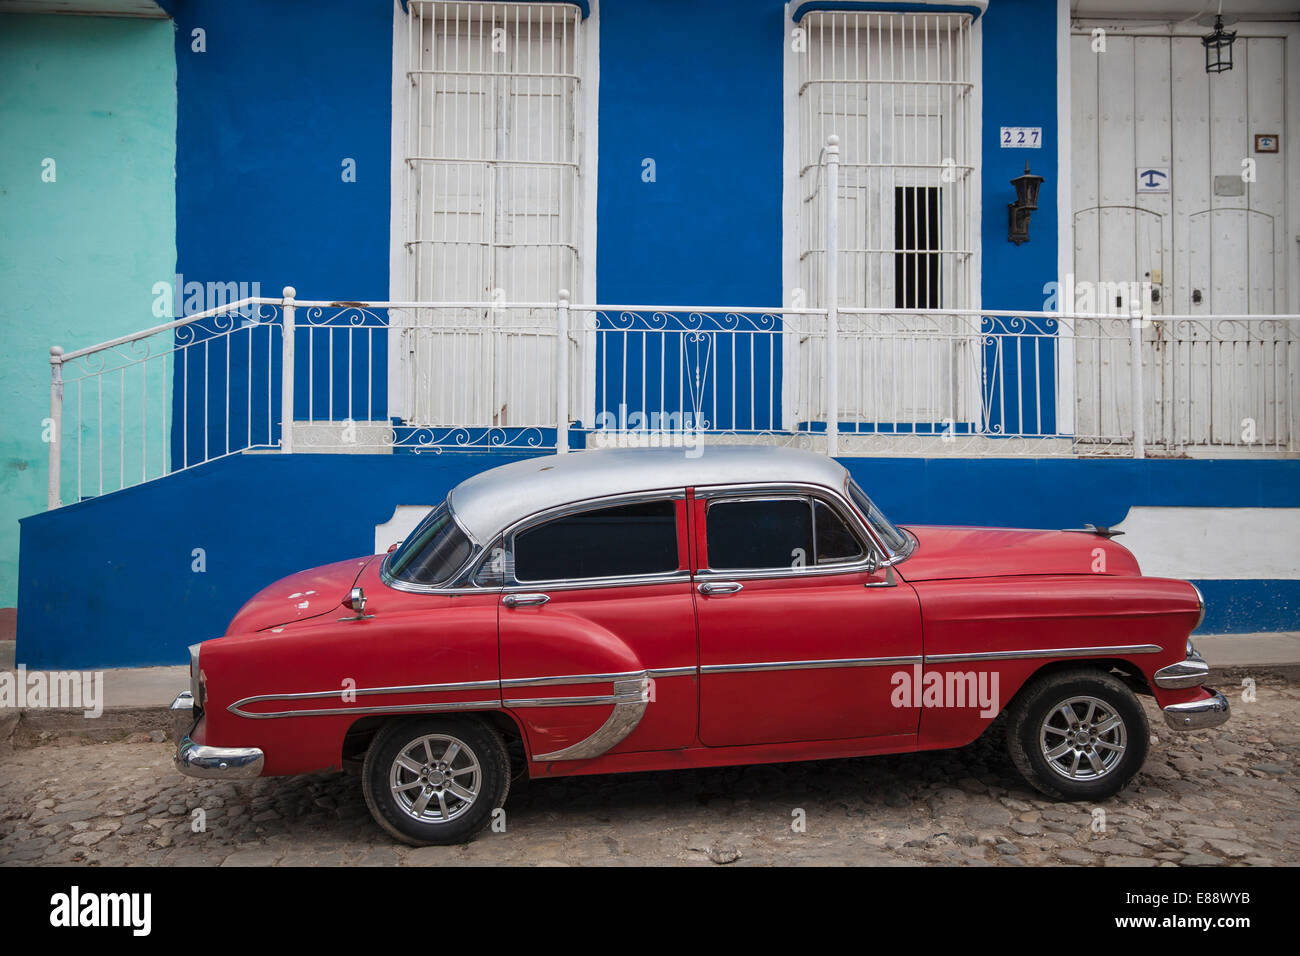 Classic American car in historical center, Trinidad, Cuba, West Indies, Caribbean, Central America Stock Photo